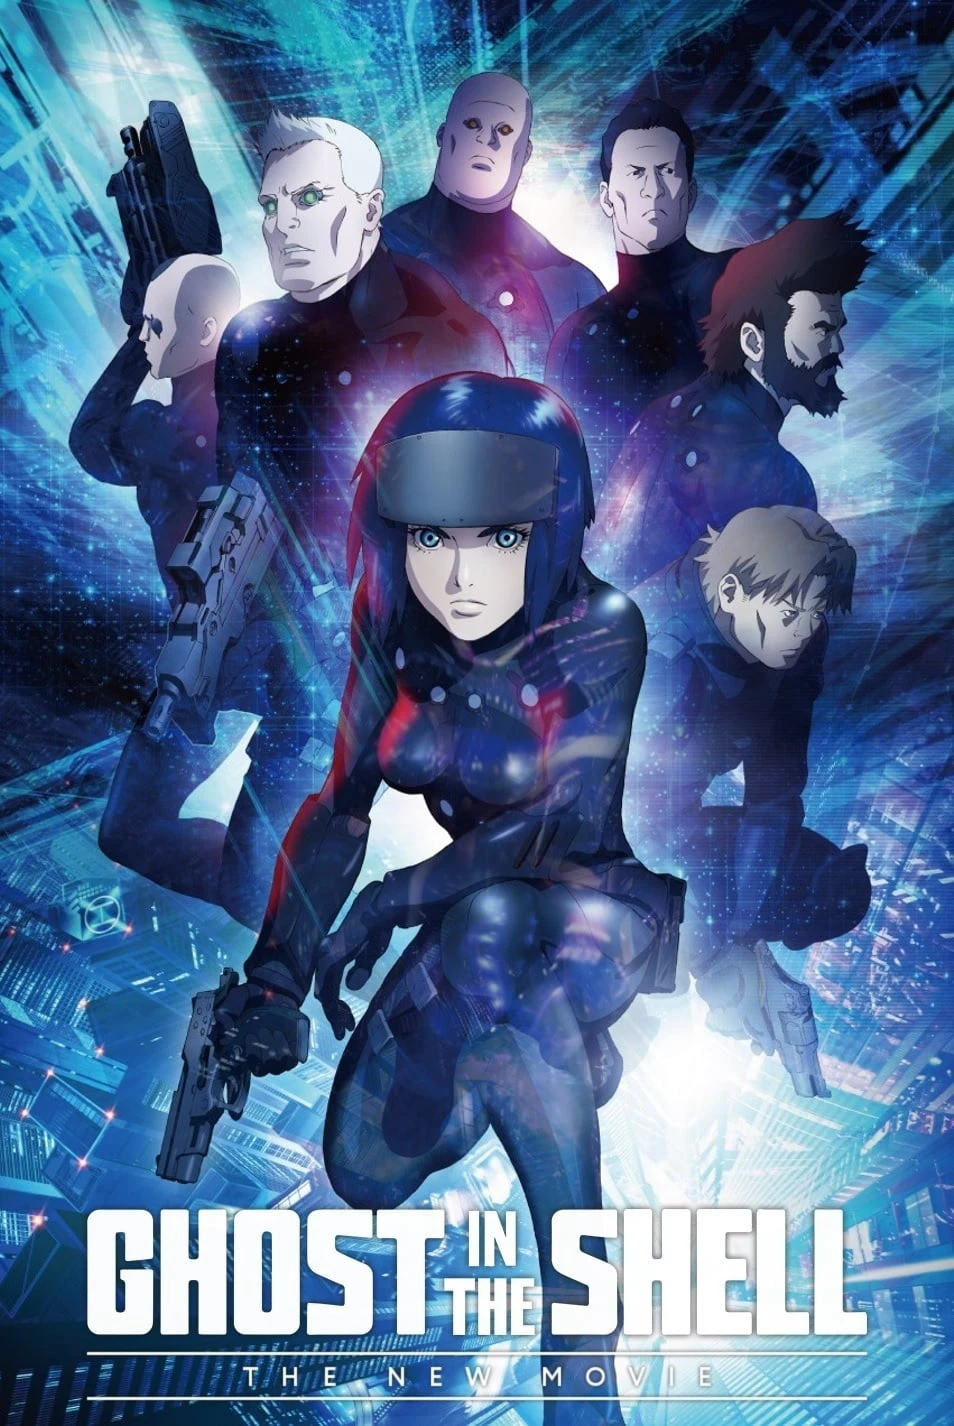 Linh Hồn Của Máy- Phần Mới | Ghost in the Shell: The New Movie (2015)